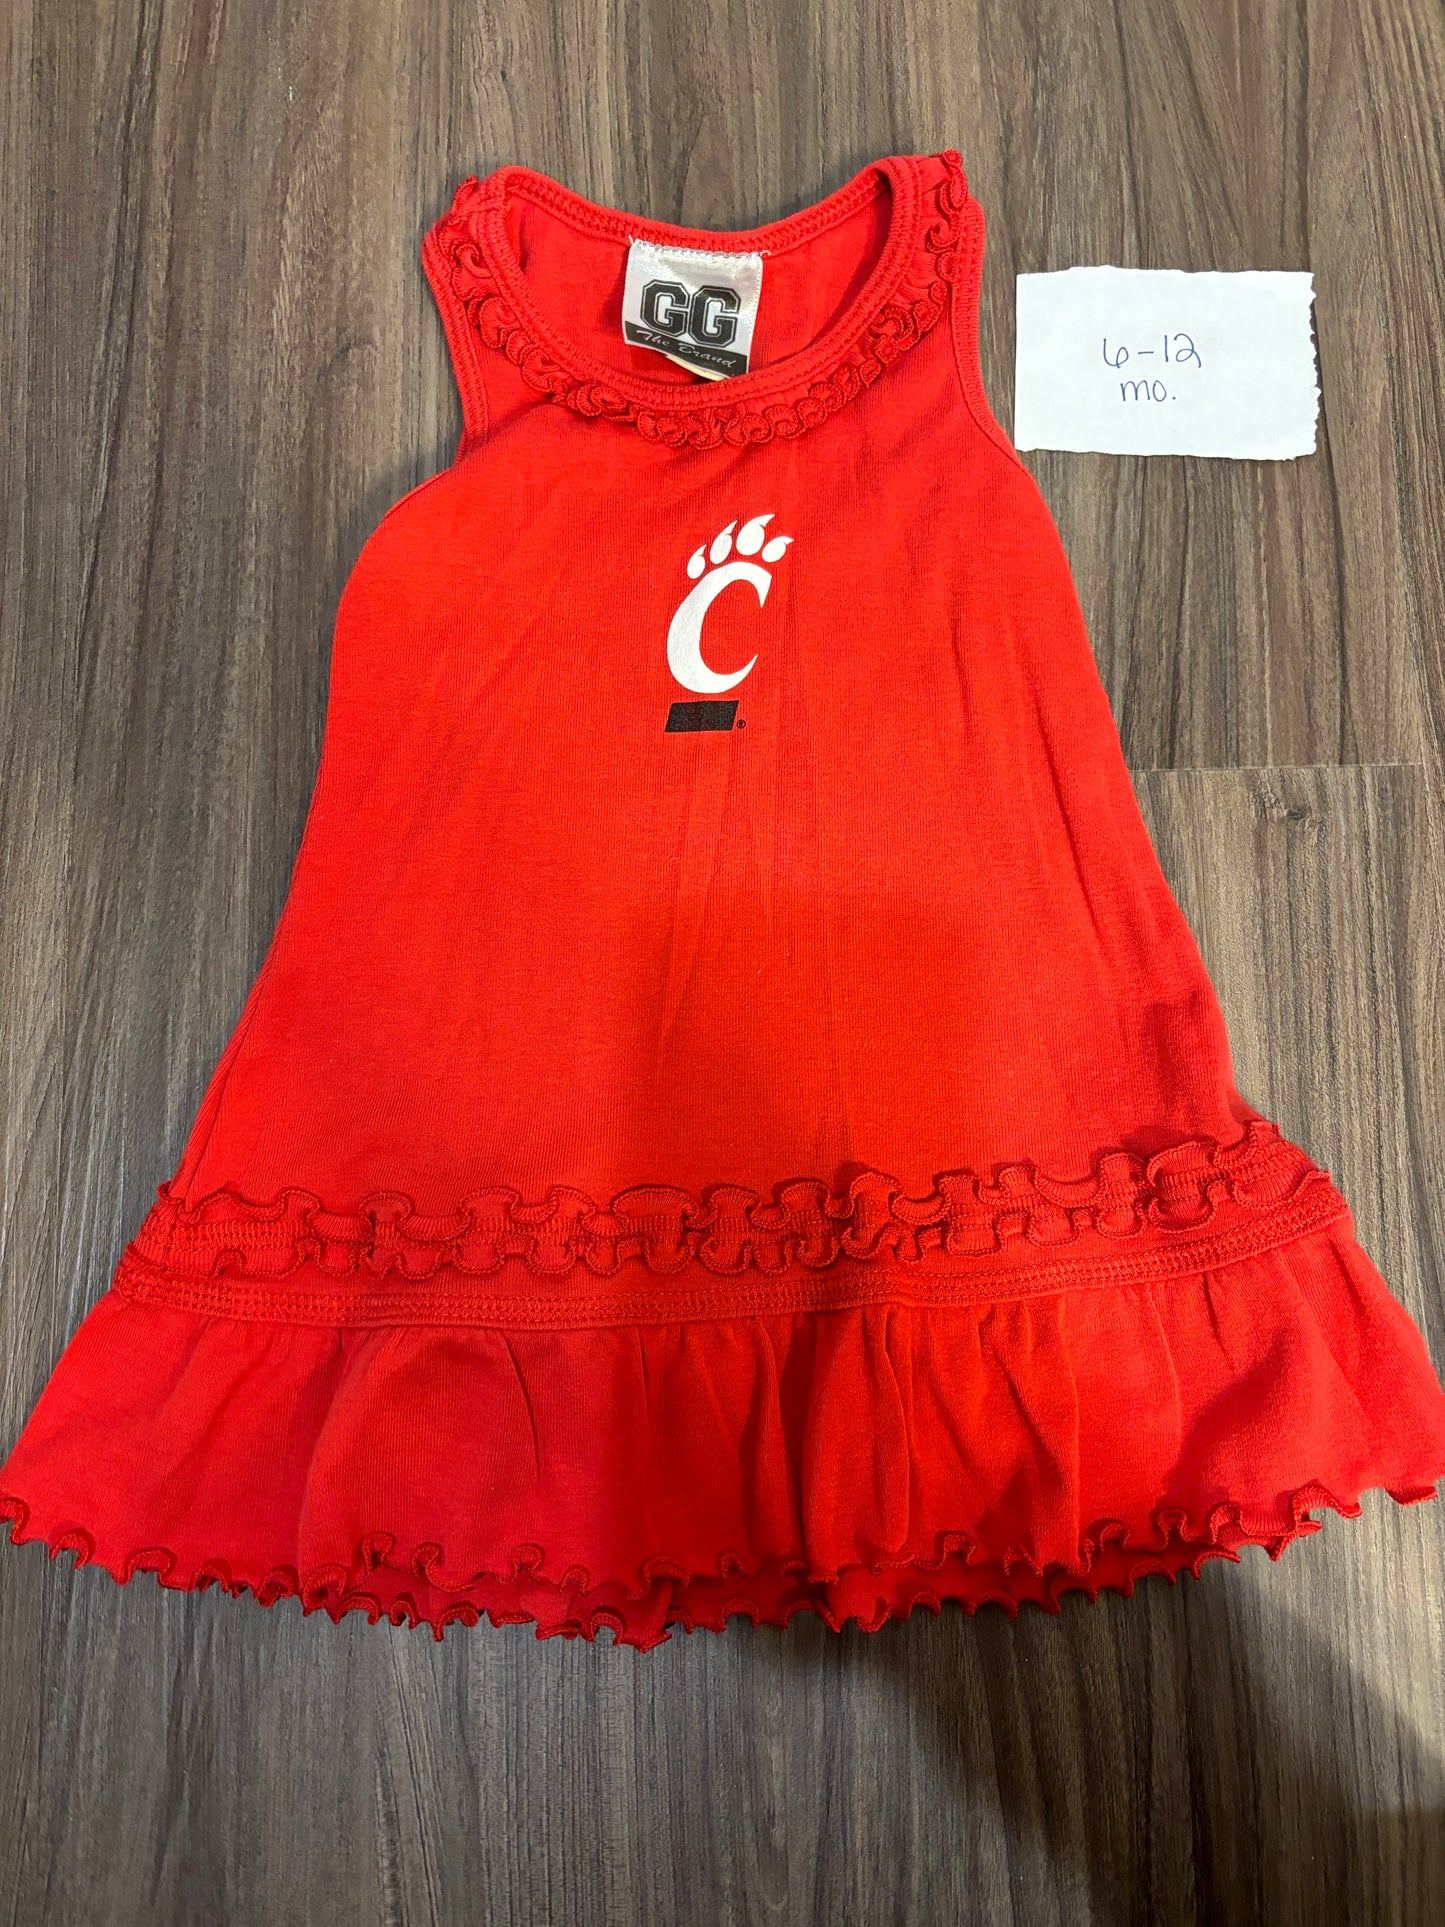 6-9 Mo -  - Tank Red UC Dress - PU 45236 Except Semiannual Sale